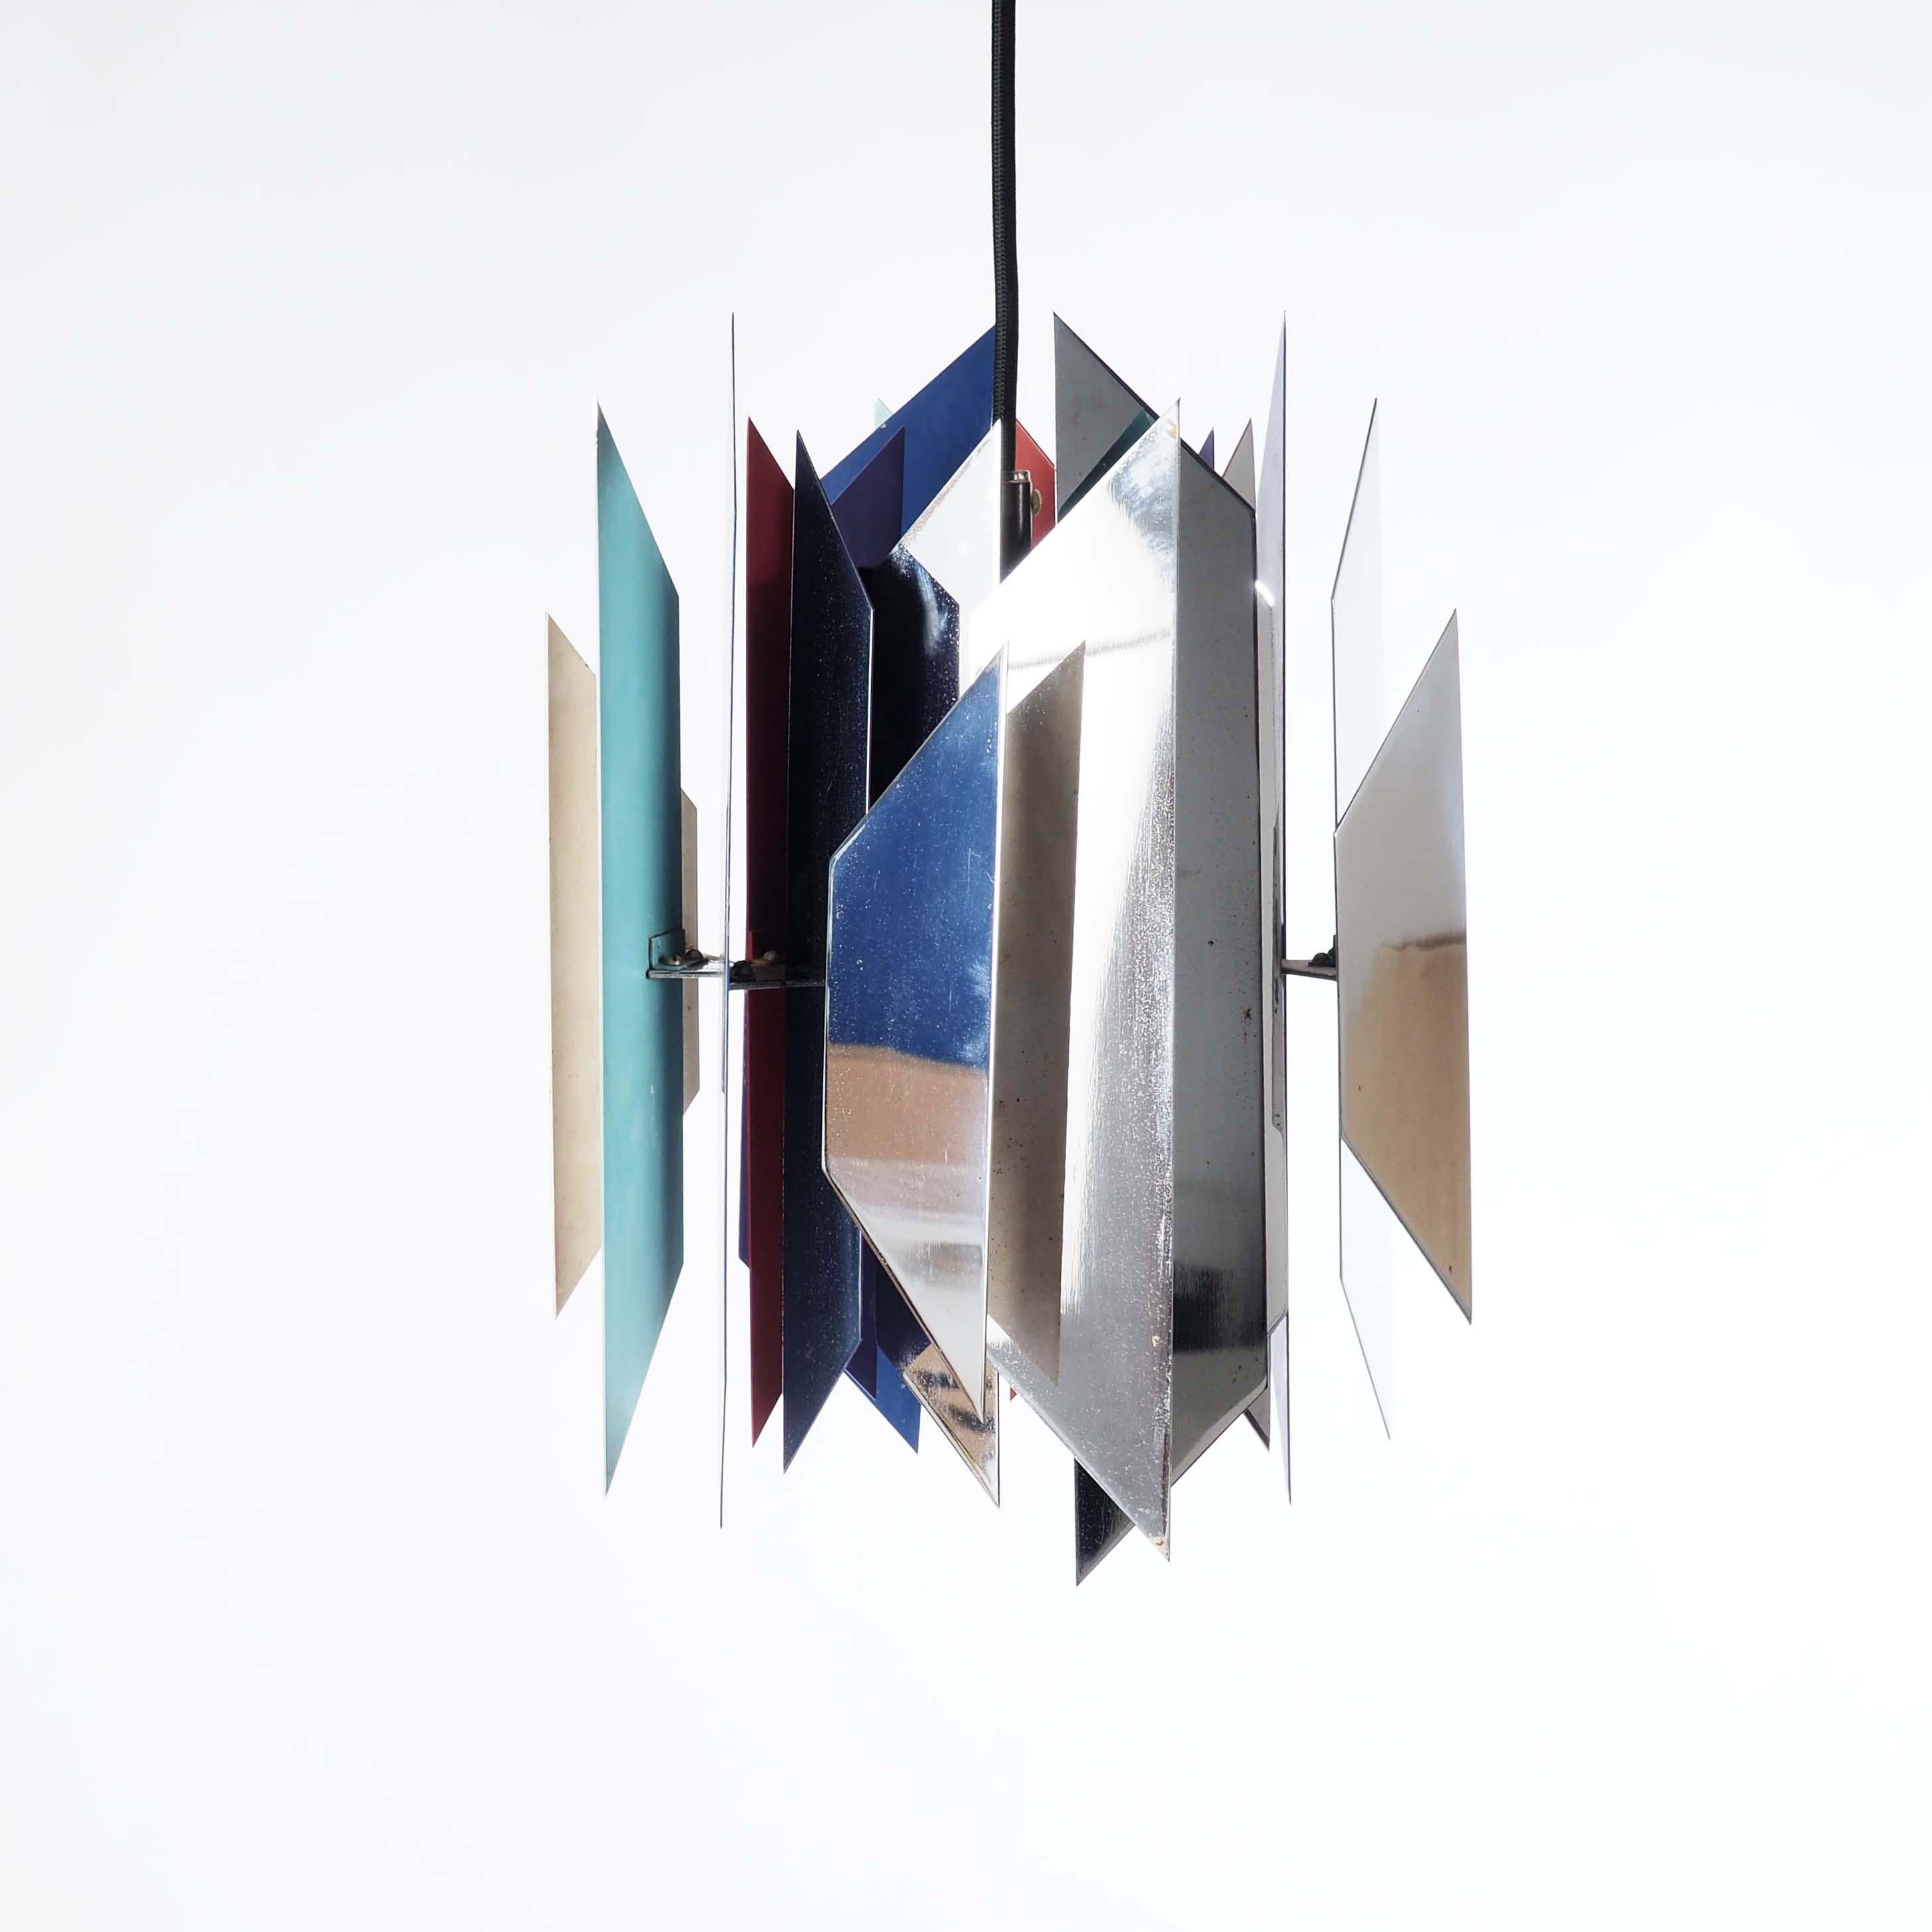 Hanging lamp by Simon Henningsen for Lyfa, Denmark. This lamp was designed for the restaurant Divan in the amusement park Tivoli in Copenhagen. Made of different lacquered and chromed metal slats is gives a joyful, warm and beautiful light. 

This